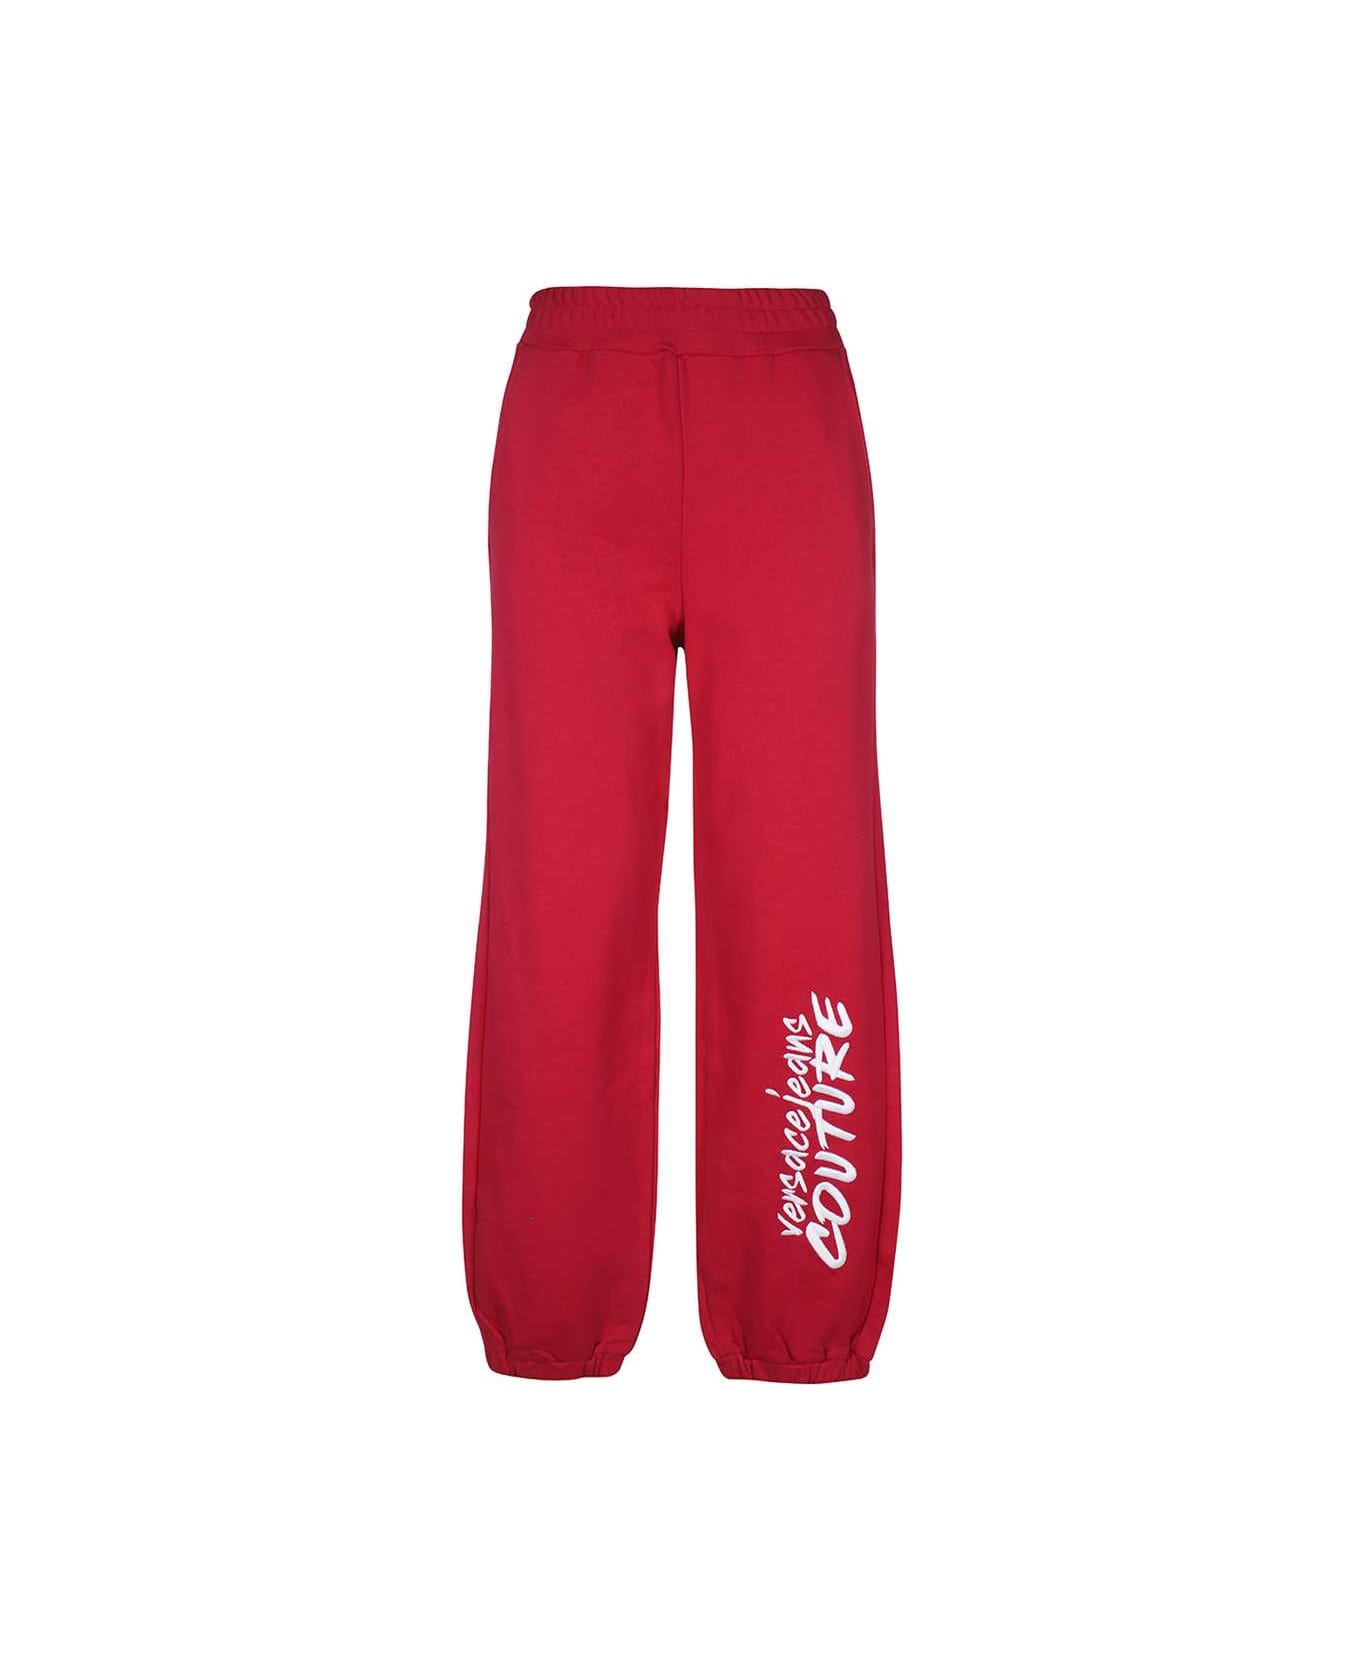 Versace Jeans Couture Logo Print Sweatpants - red